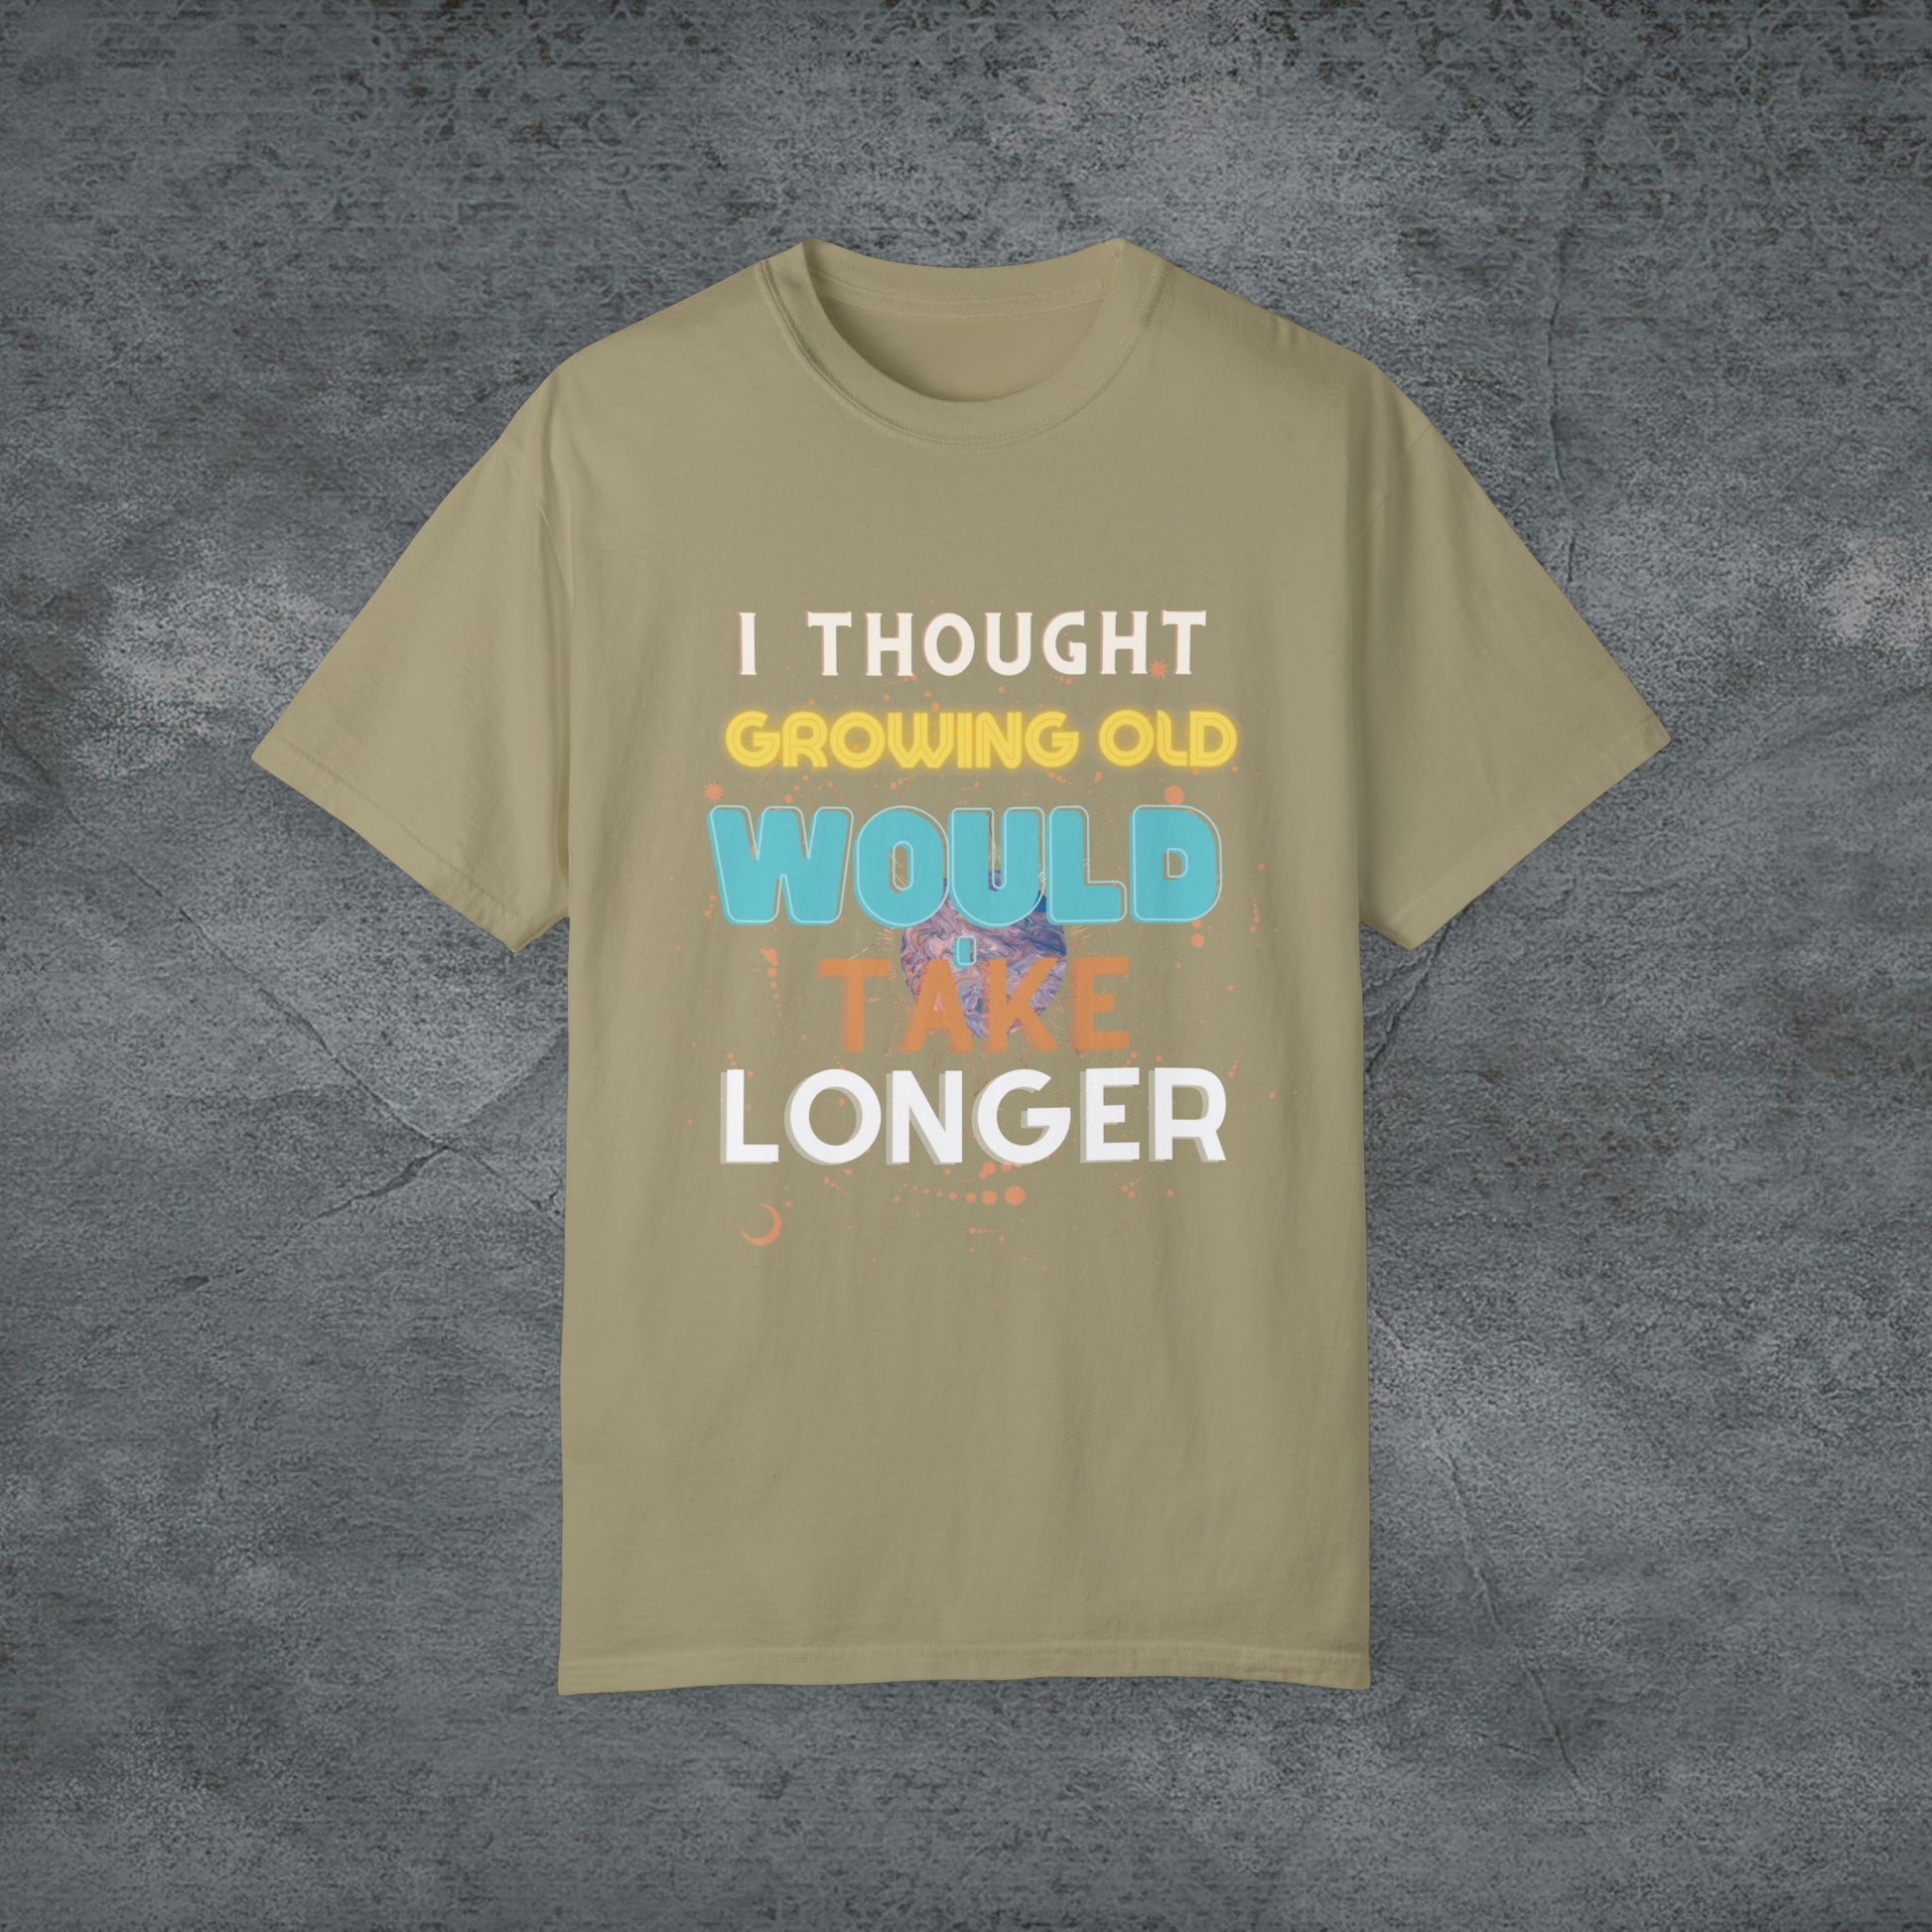 I Thought Growing Old Would Take Longer T-Shirt | Getting Older T Shirt | Funny Adulting T-Shirt | Old Age T Shirt | Old Person T Shirt T-Shirt Khaki S 